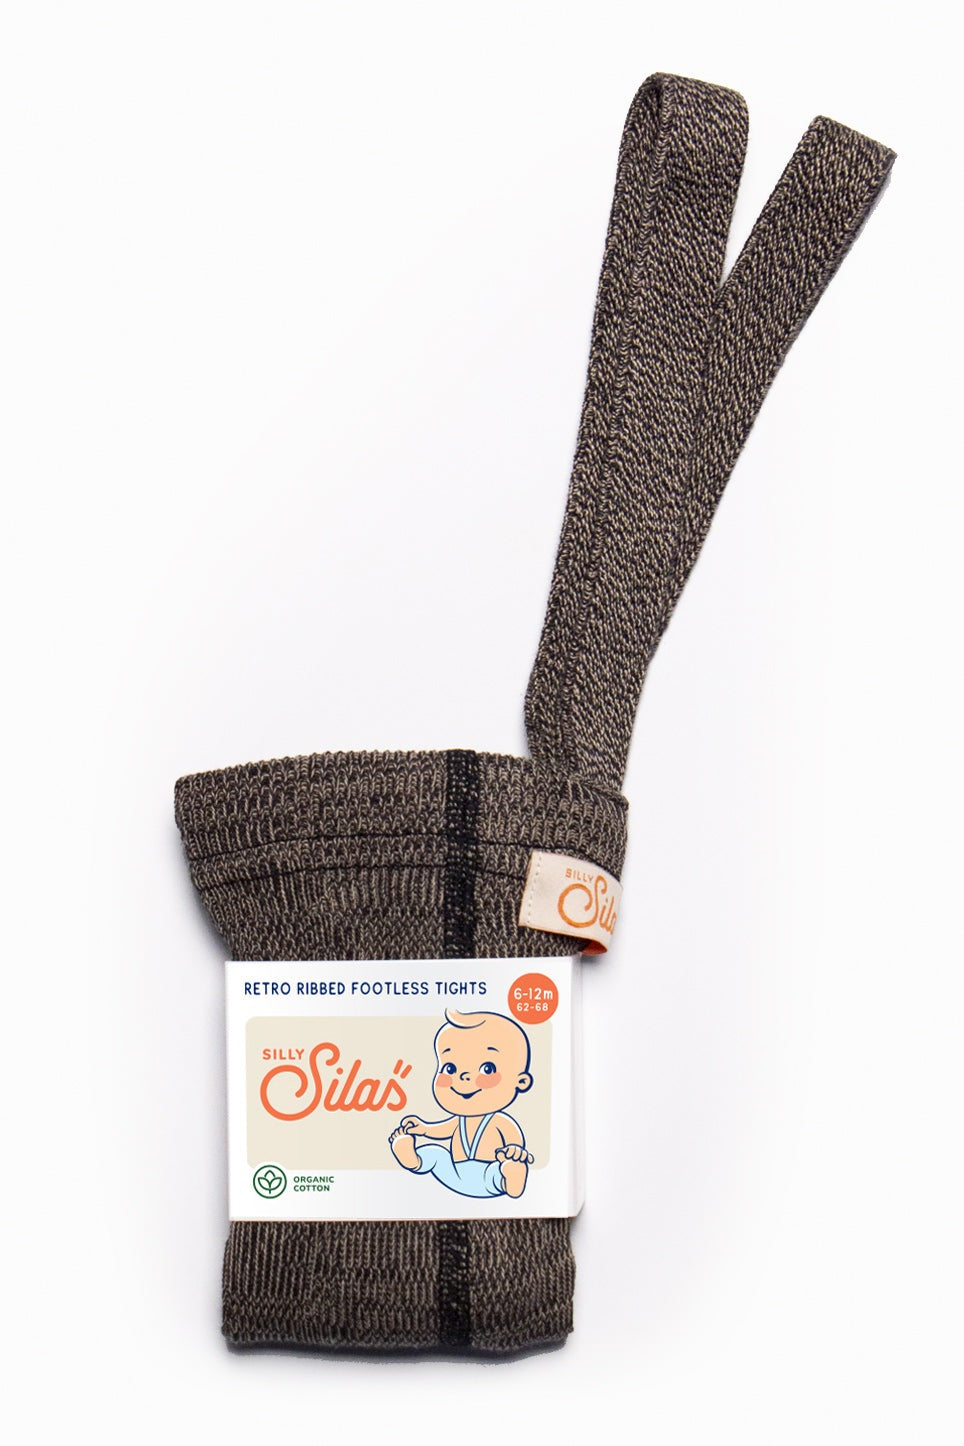 Silly Silas, Footless Tights with Braces, Licorice Peanut, baby tights, Children’s tights, Nottinghamshire Stockist, independent children’s brands, midlands baby Store  